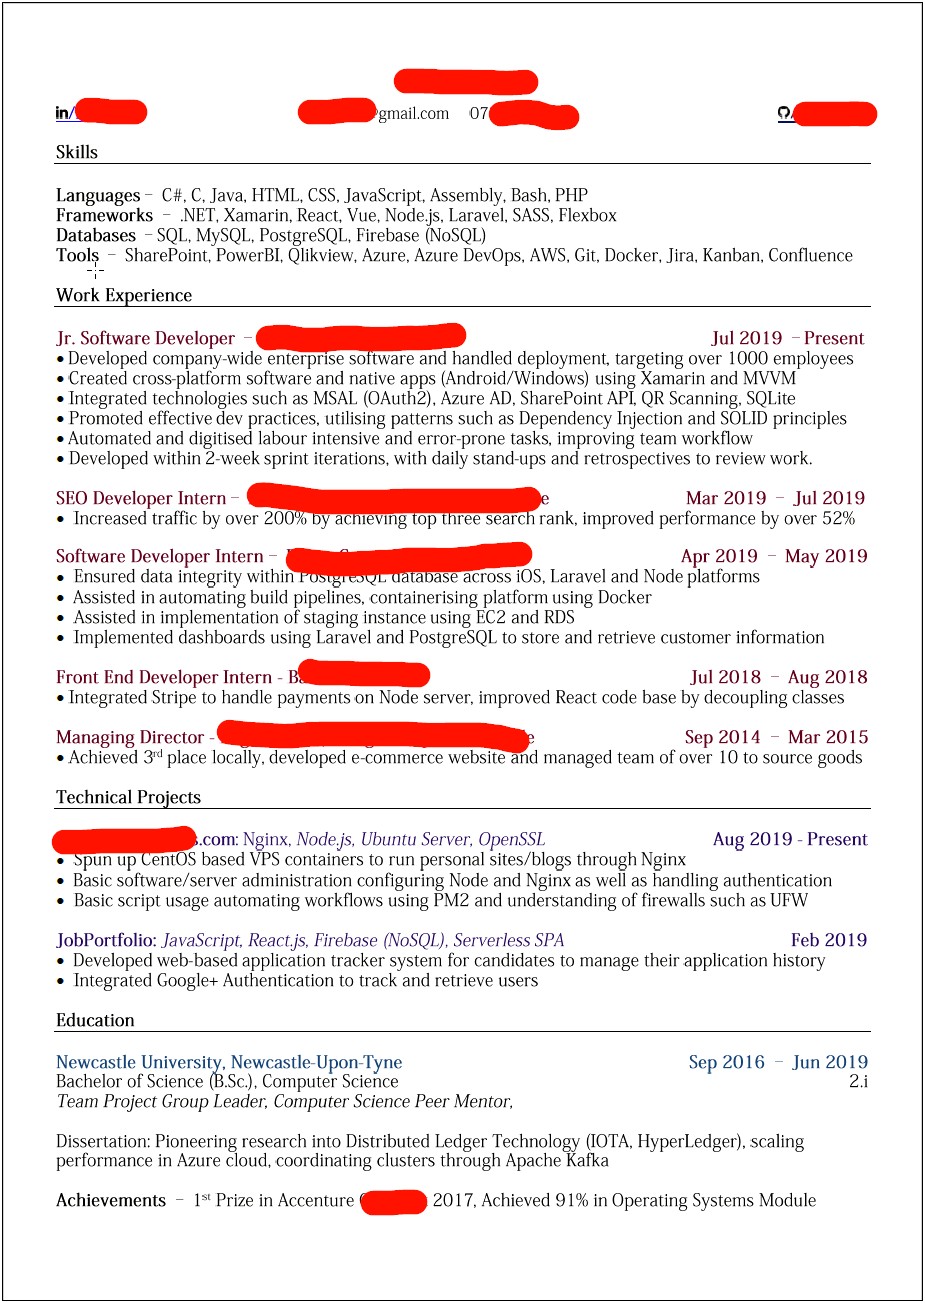 Product Manager Resume Template Reddit Cscareerquestions